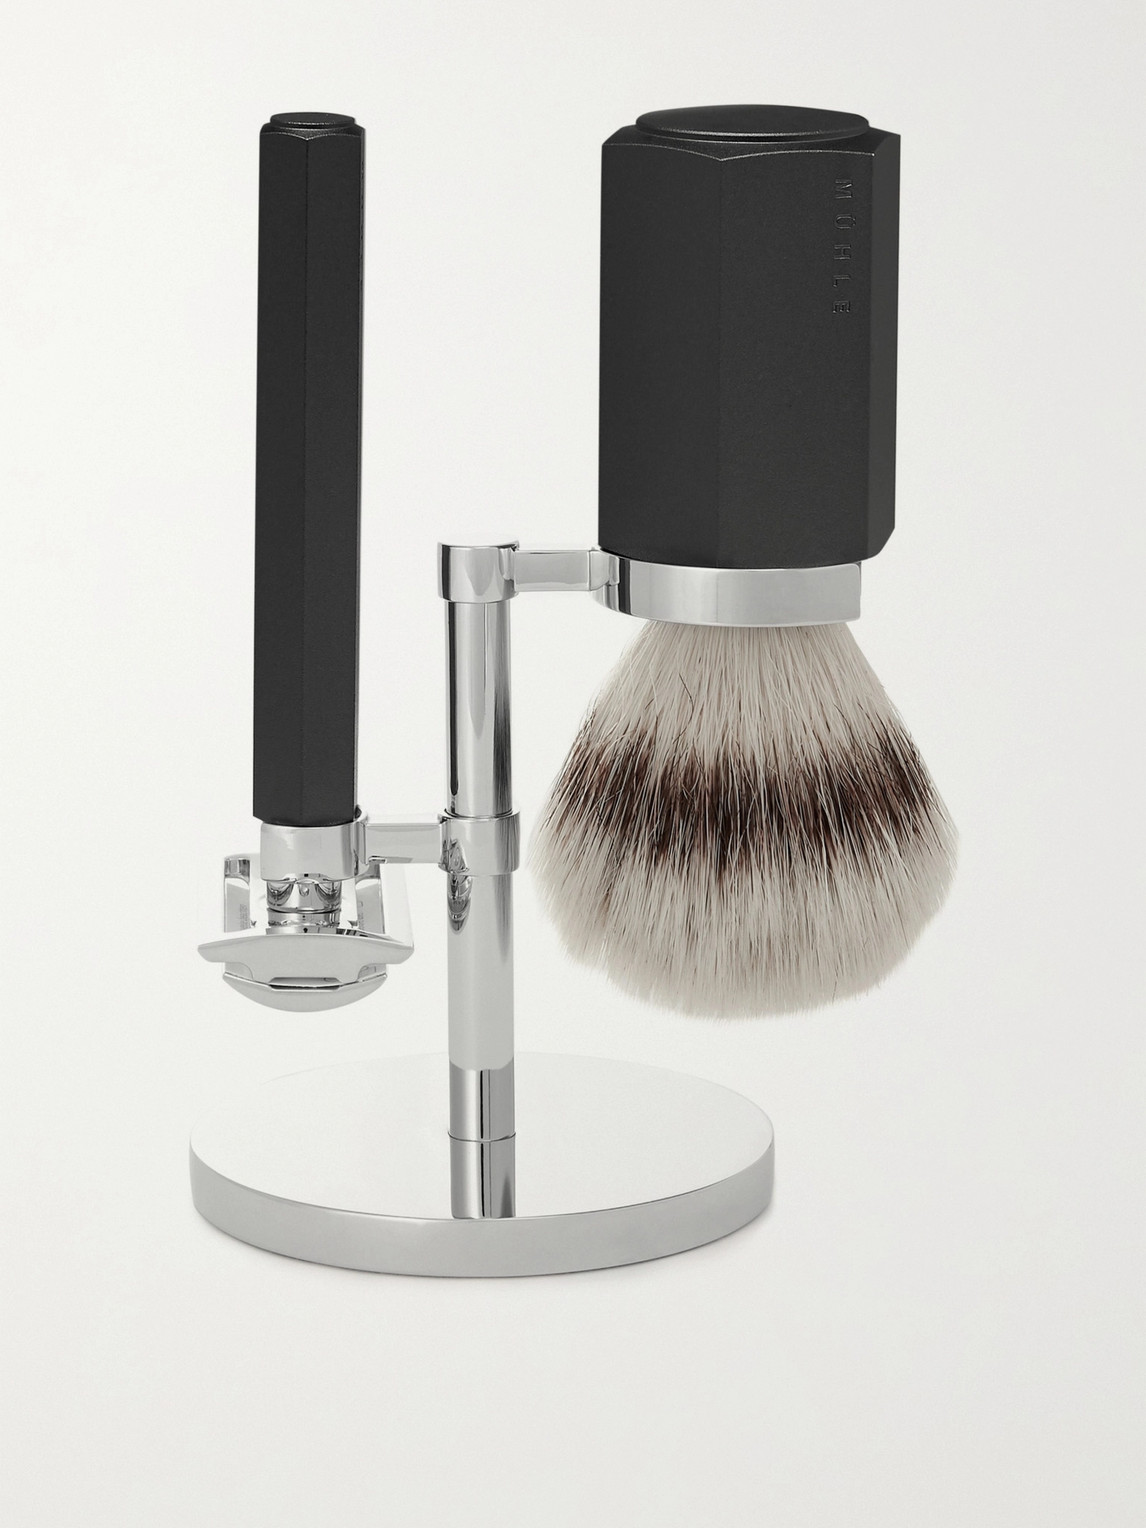 Mühle Hexagon Chrome-plated And Graphite Three-piece Safety Shaving Set In Colorless